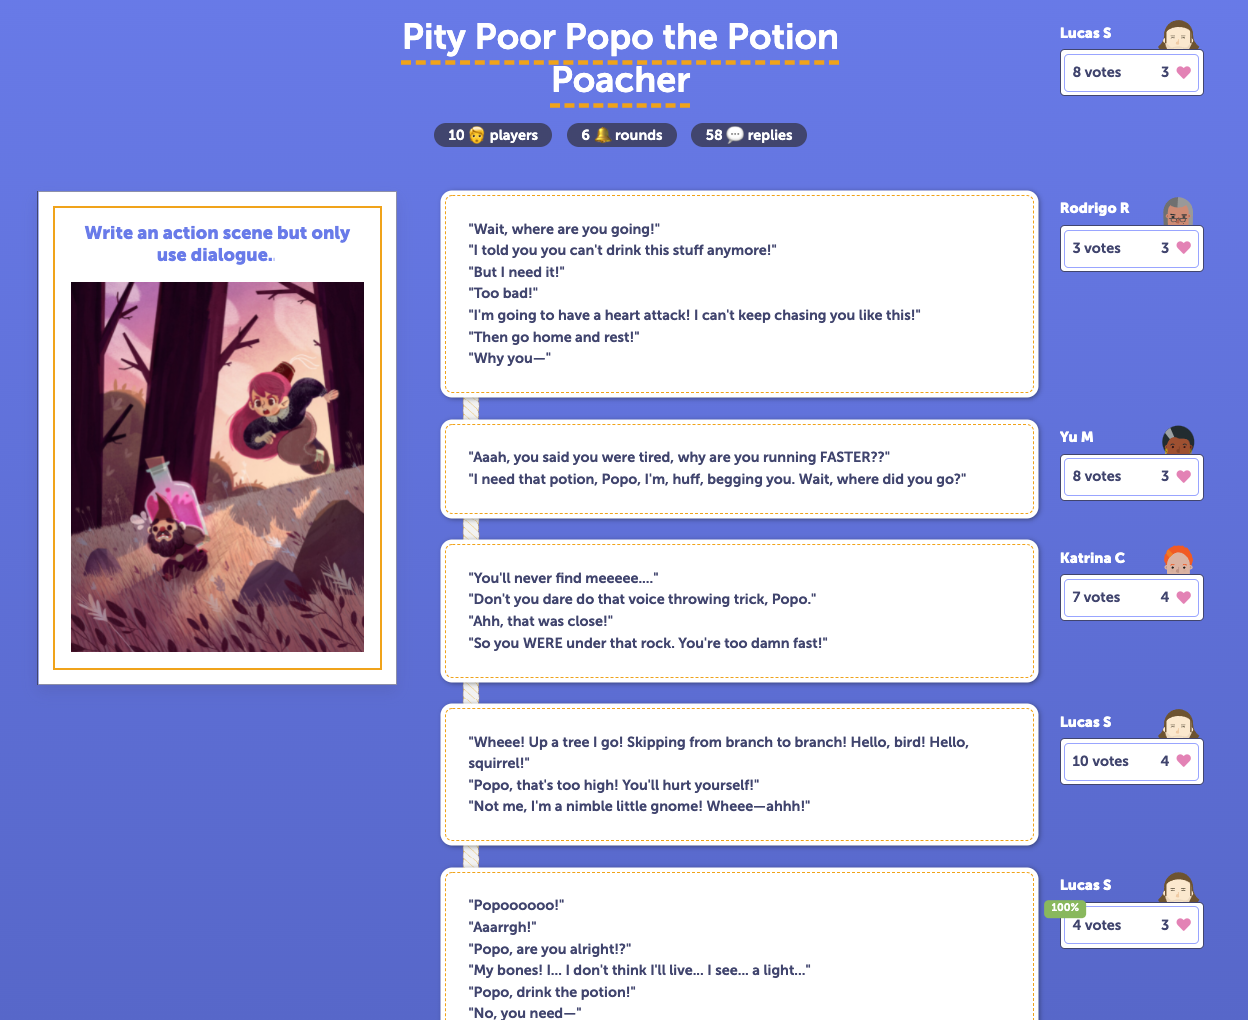 The completed story titled "Pity Poor Popo the Potion Poacher"